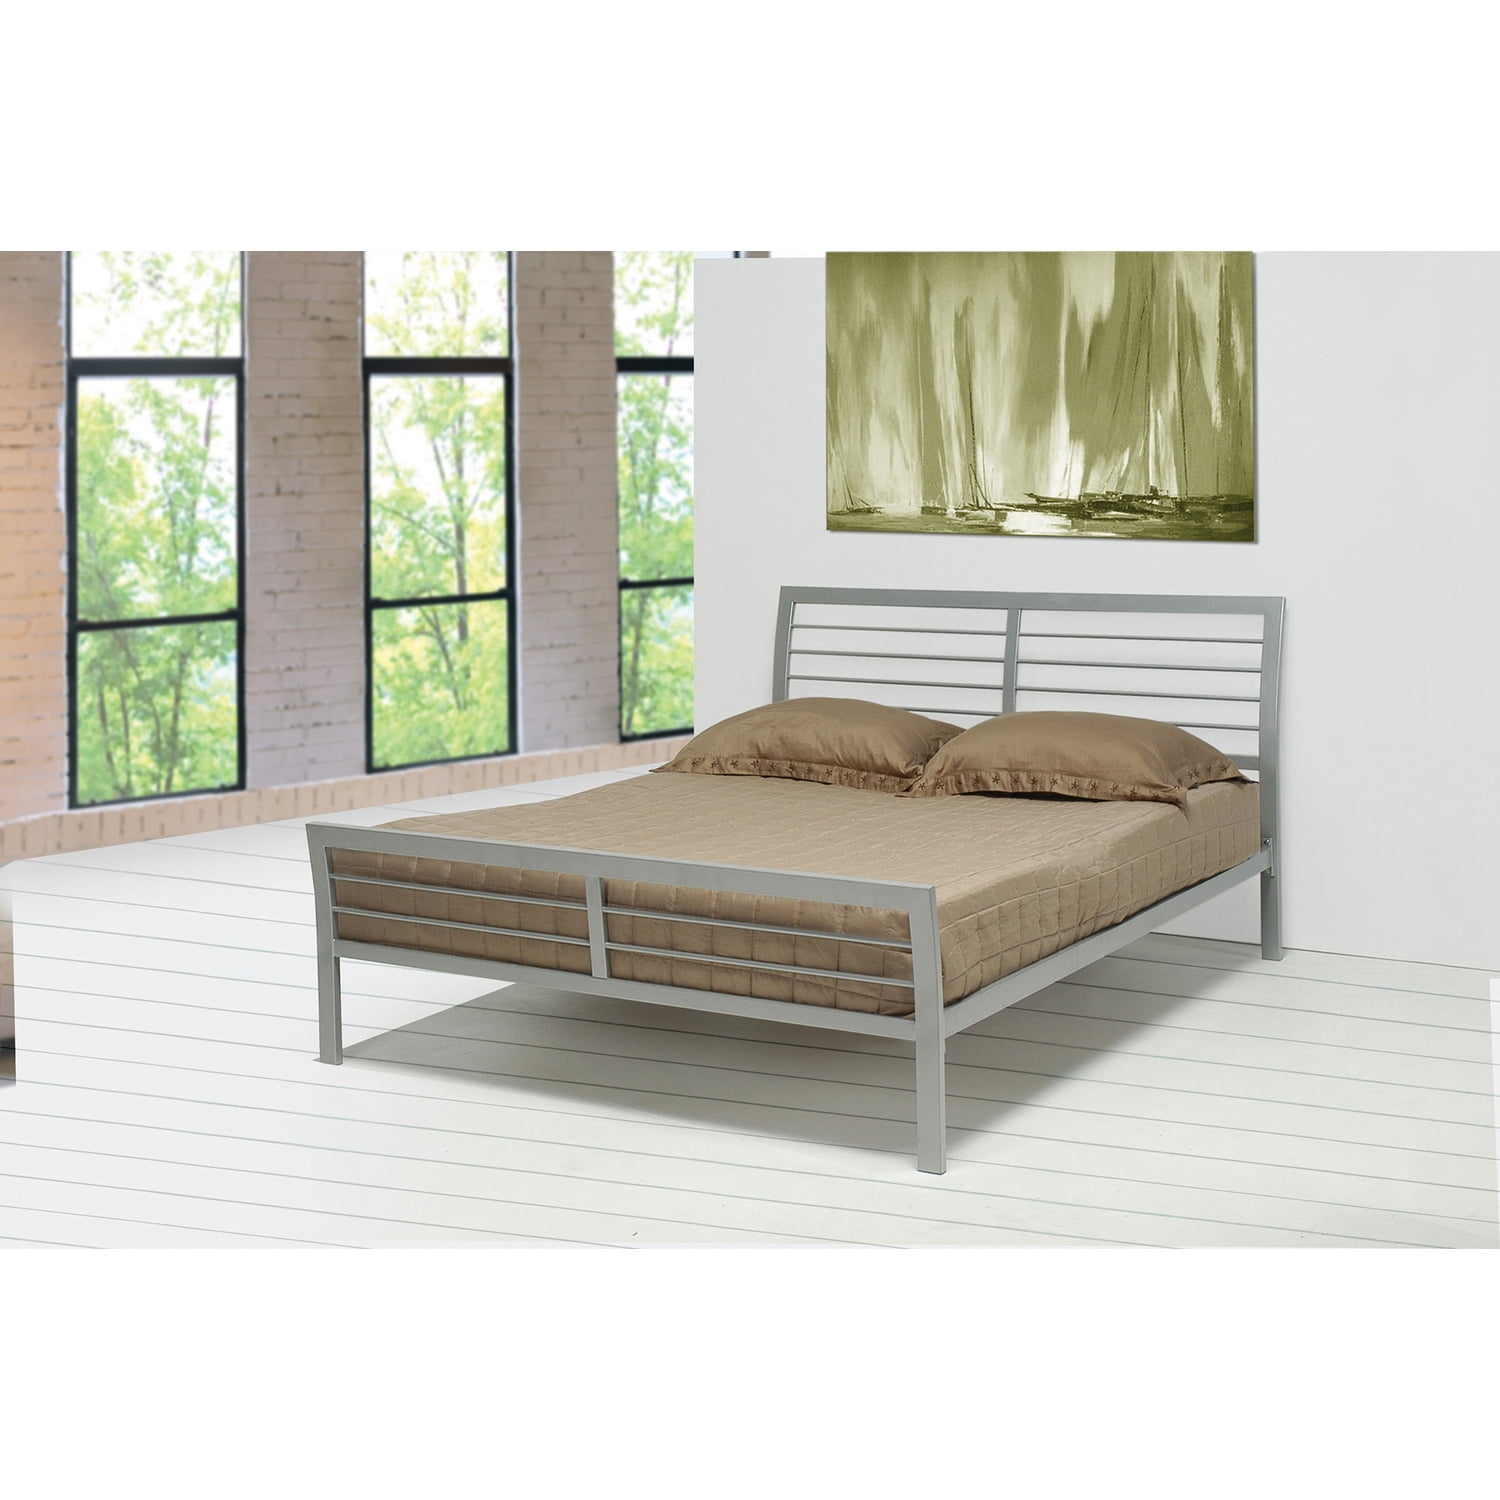 BM158143 38.25 x 88 x 63 in. Transitional Style Queen Size Metal Bed, Silver -  Benzara